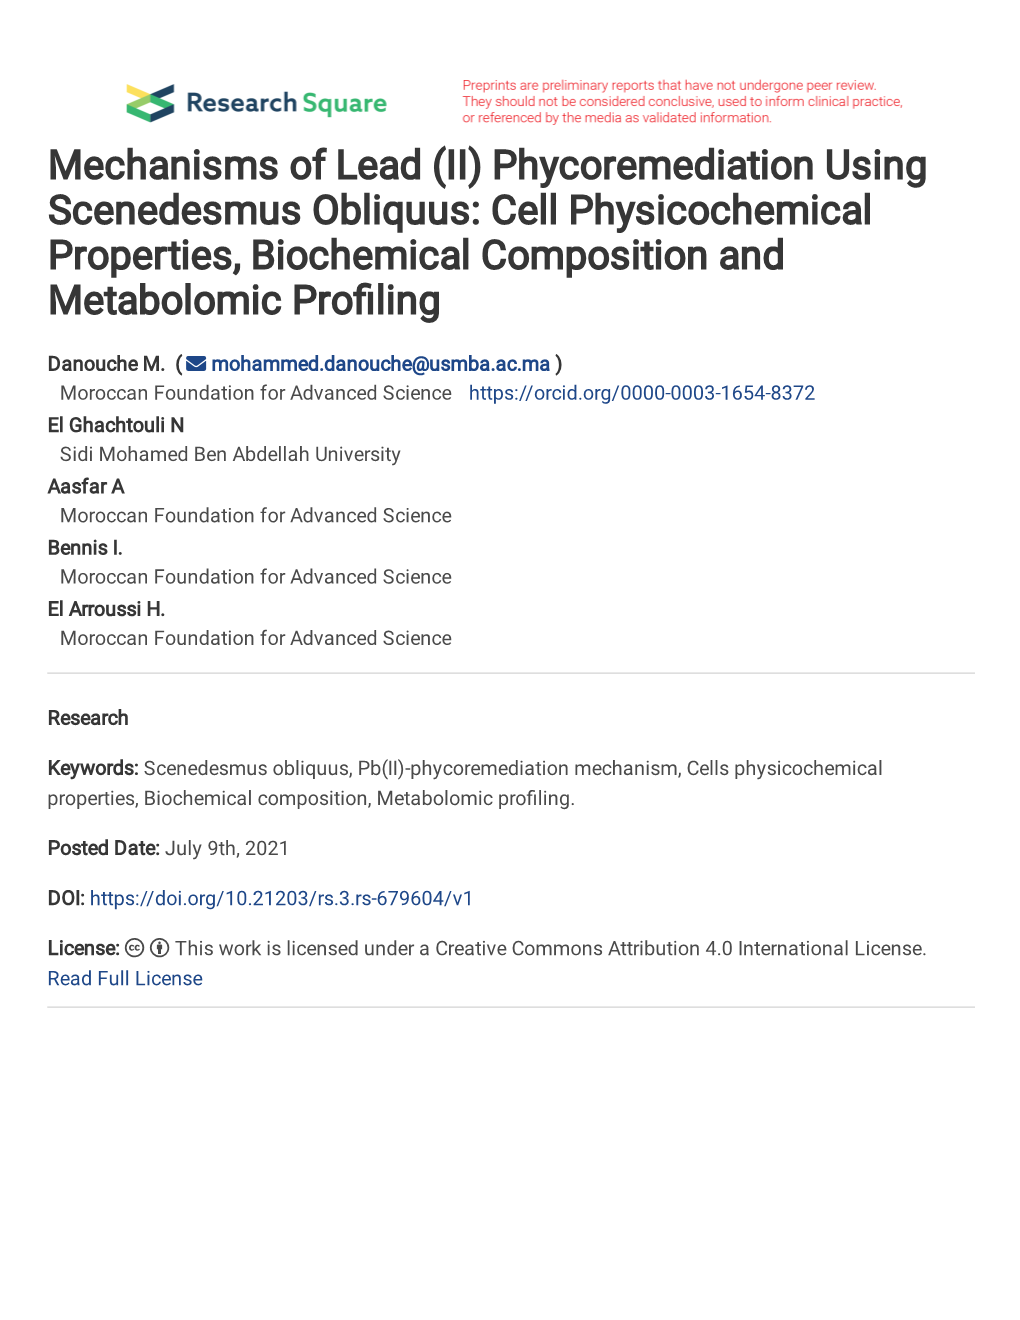 (II) Phycoremediation Using Scenedesmus Obliquus: Cell Physicochemical Properties, Biochemical Composition and Metabolomic Pro�Ling